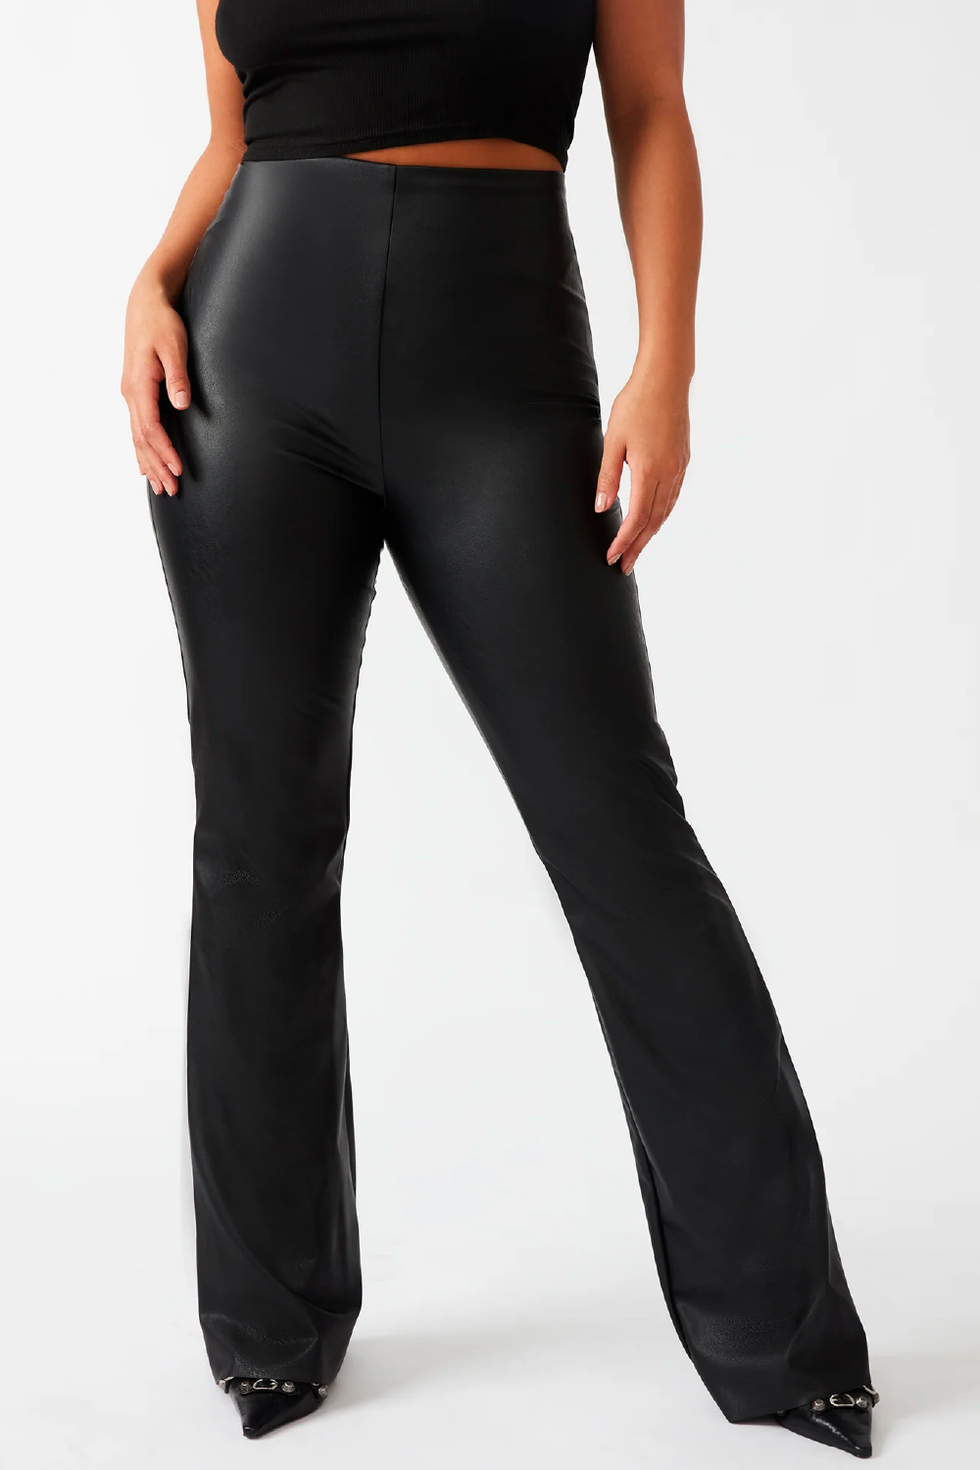 Yummie Women's Faux Leather Shaping Legging with Front & Back Seam